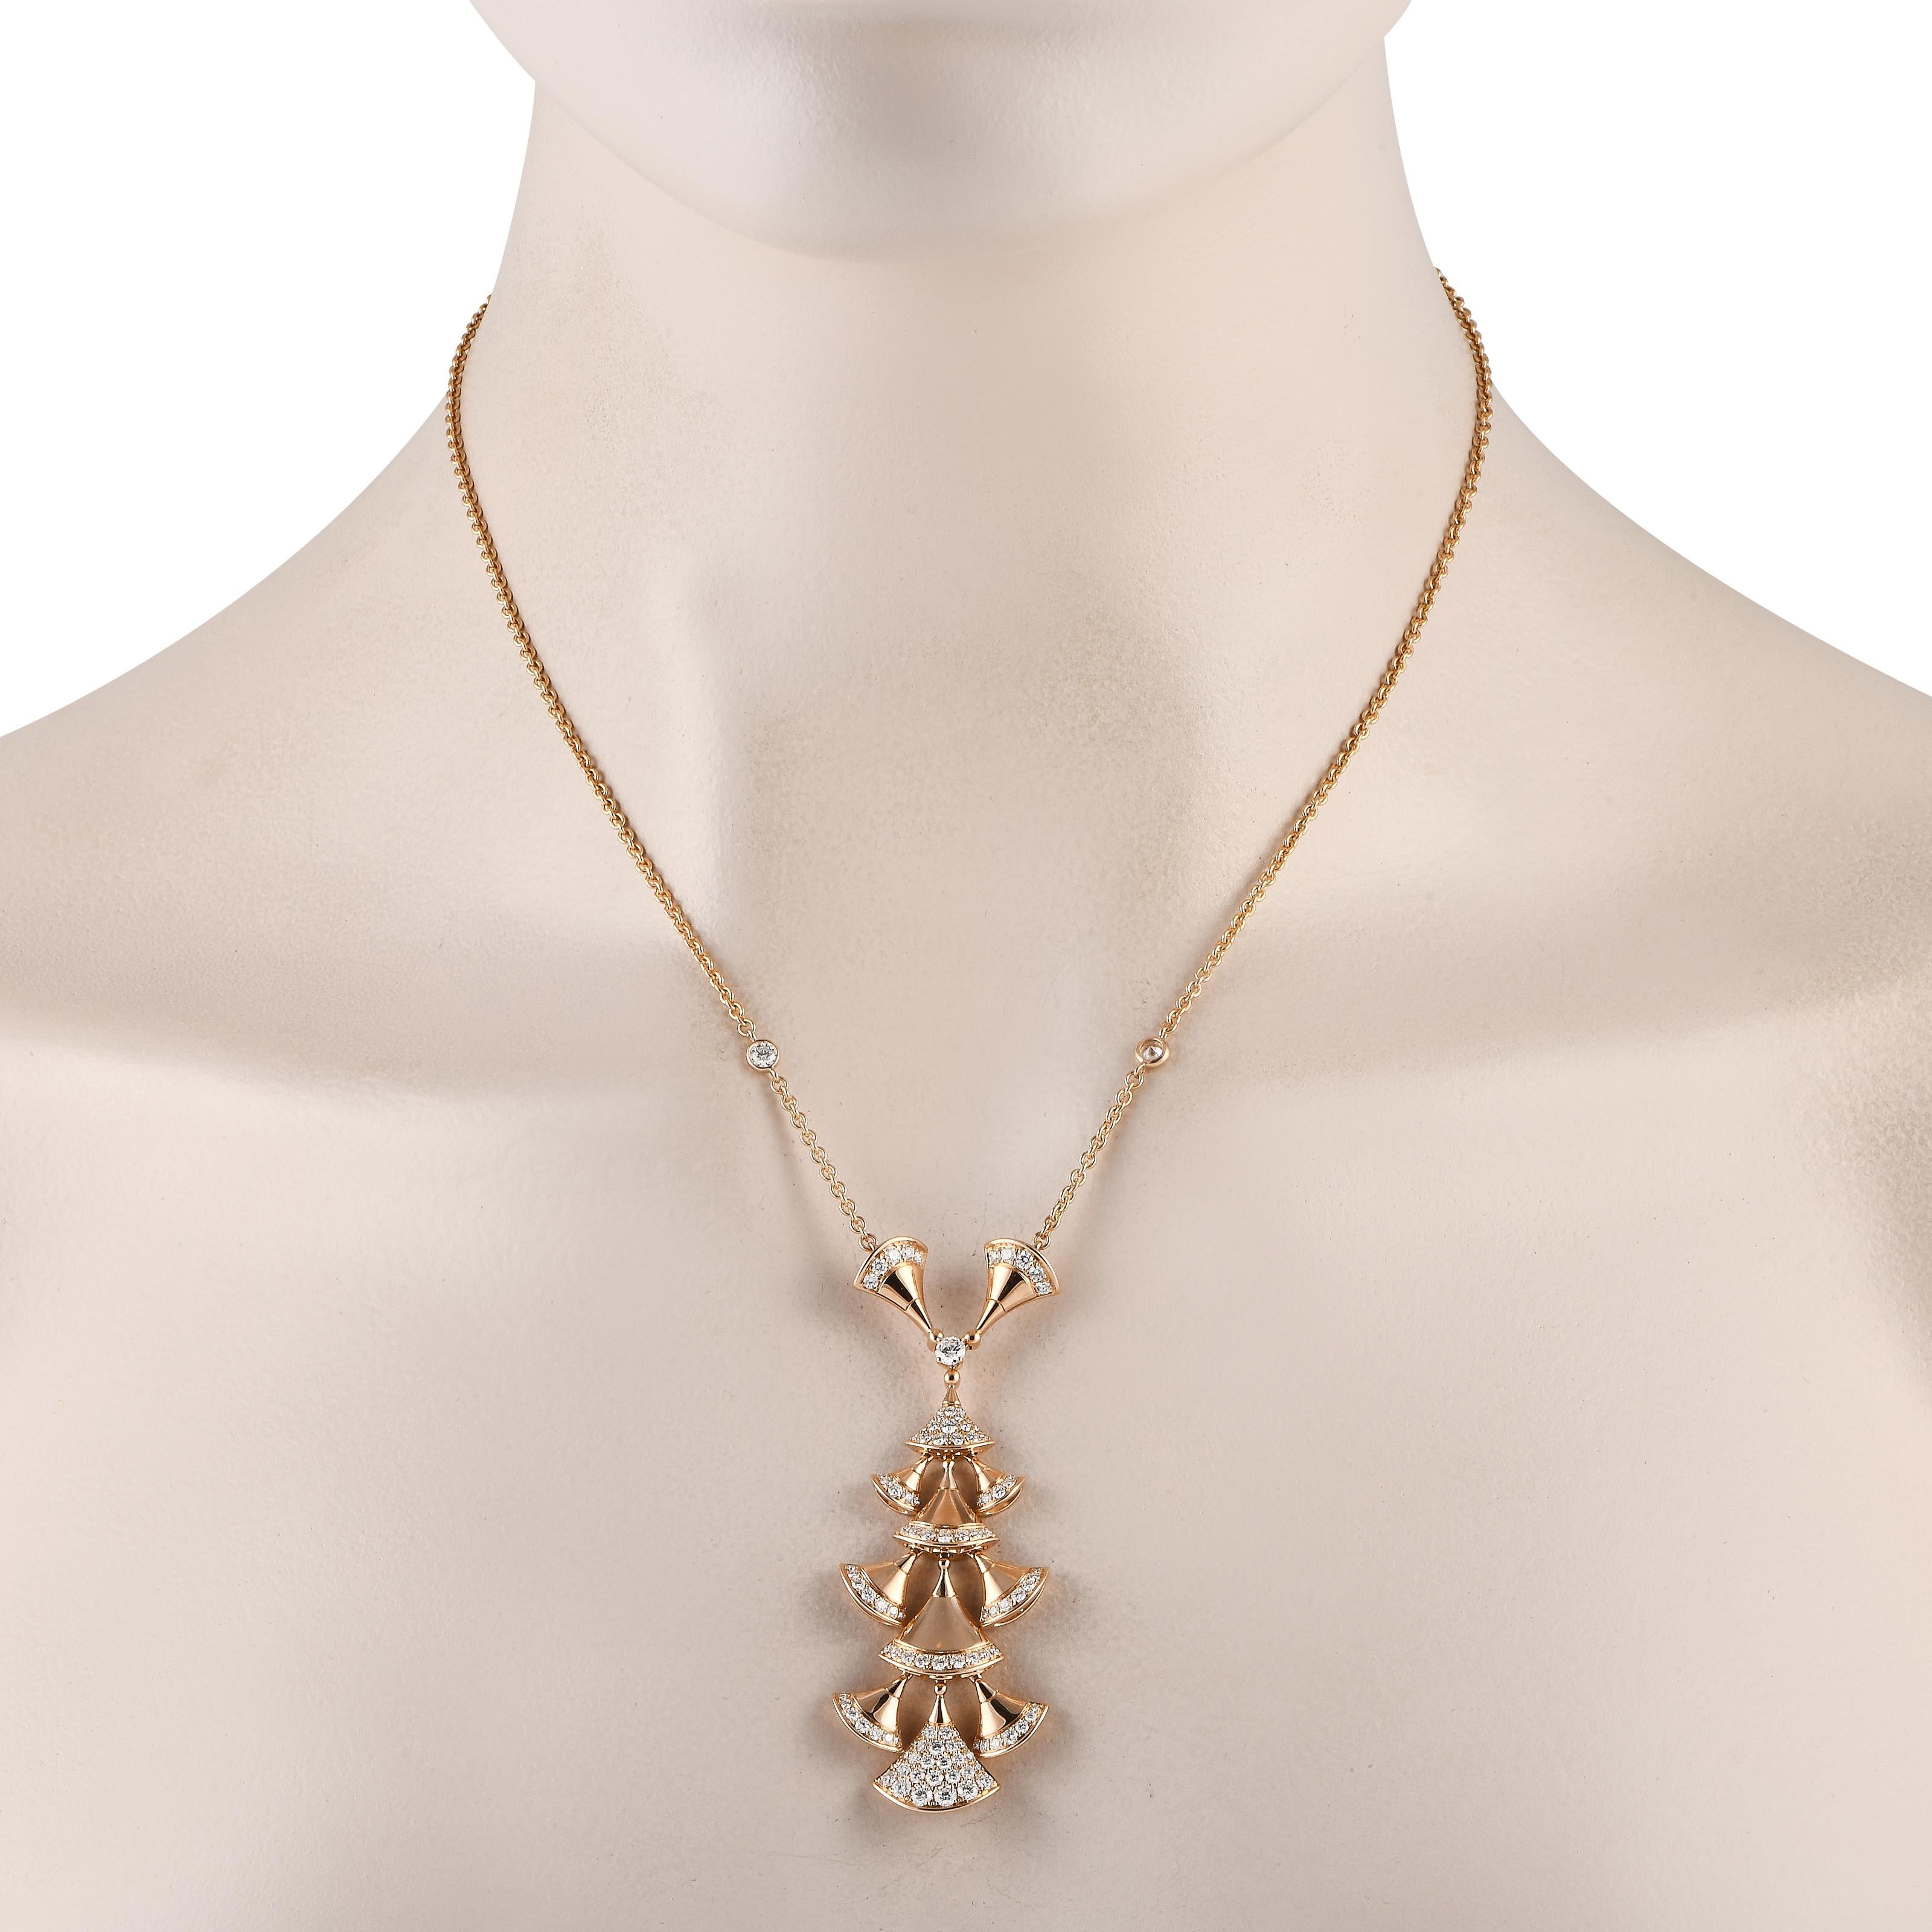 Give your dressy outfit a glamorous and feminine finish with this rose gold and diamond necklace from Bvlgari. The 17